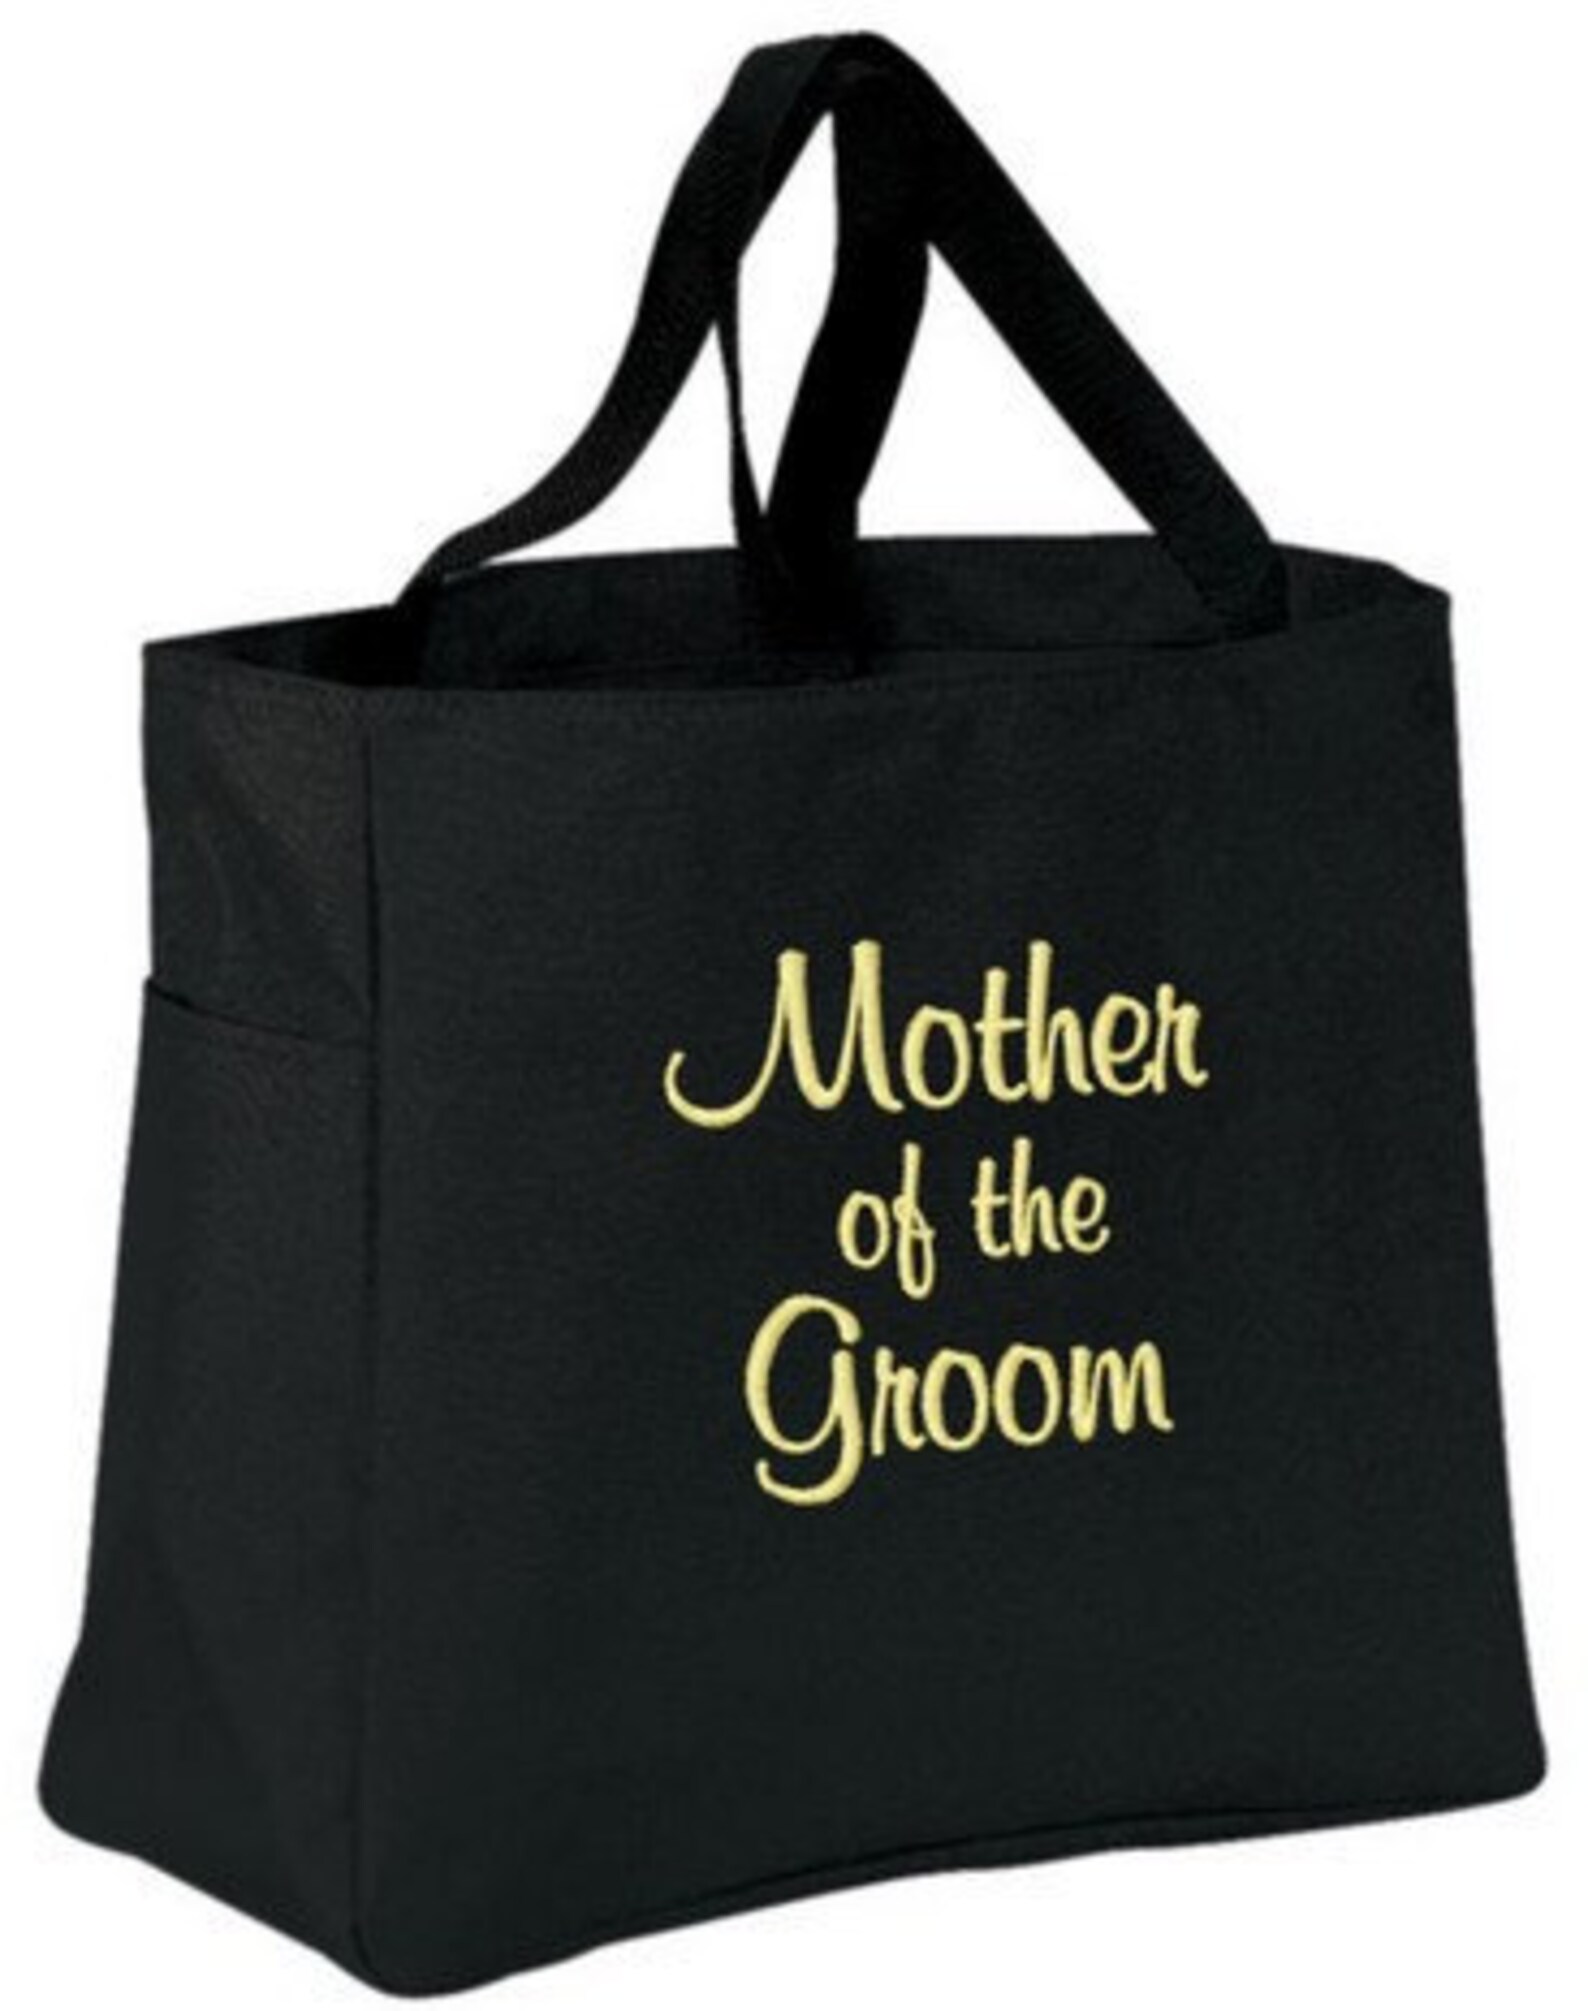 Mother of the Bride / Groom Tote Bag Bridal Party Gift - Etsy